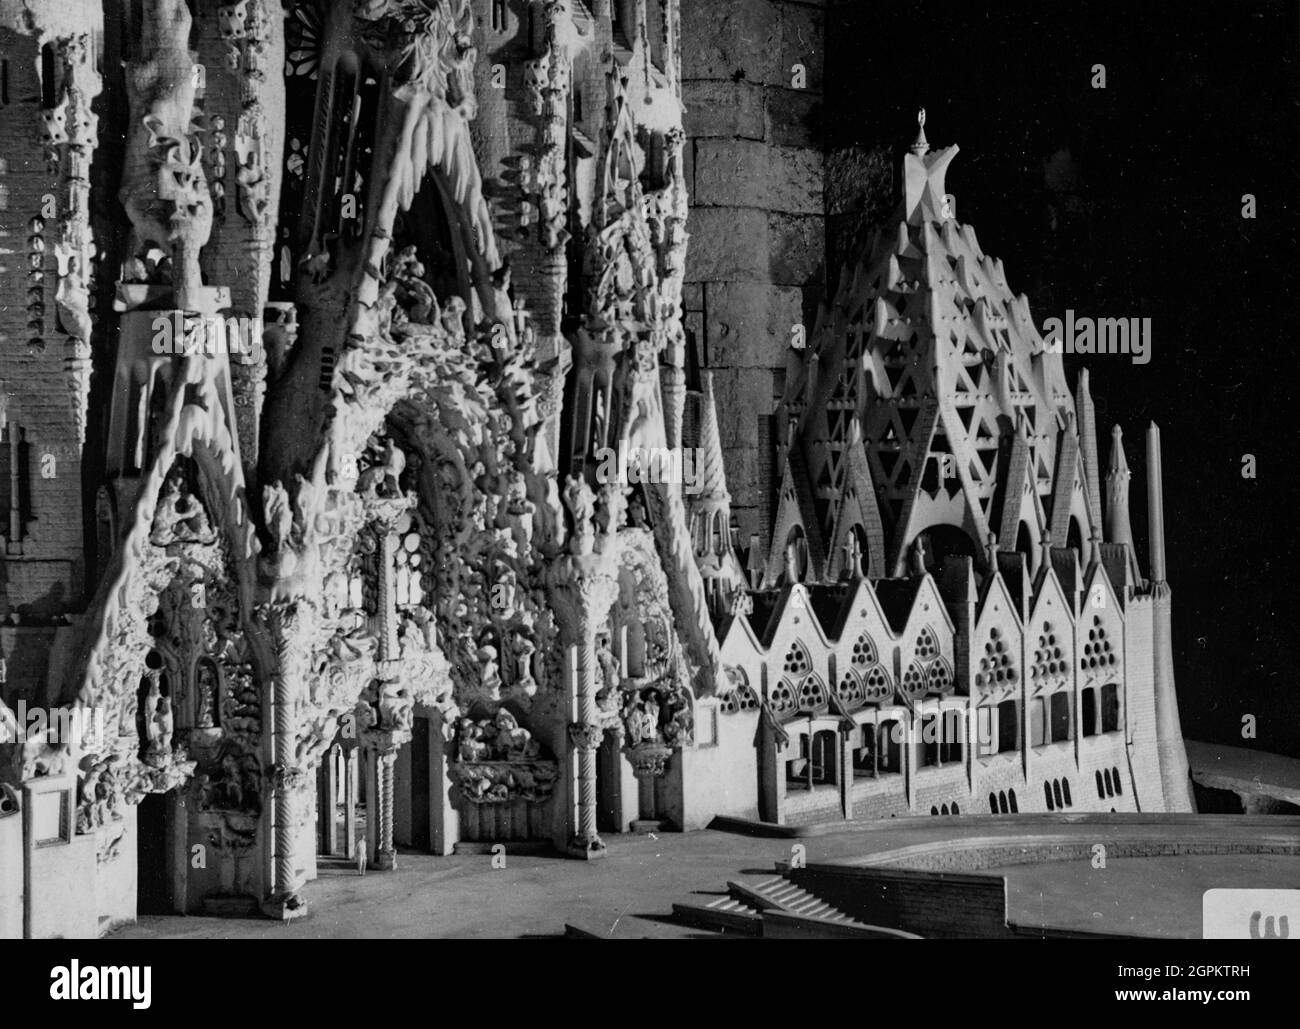 Sagrada Familia (museum in the crypt of the Passion Facade): the 1:25 scaled plaster model made by Gaudí for the Sagrada Familia from 1914 onwards (1926) destroyed during 1936-39 Spanish Civil War and restored after, 1970. Author: ANTONI GAUDI. Stock Photo